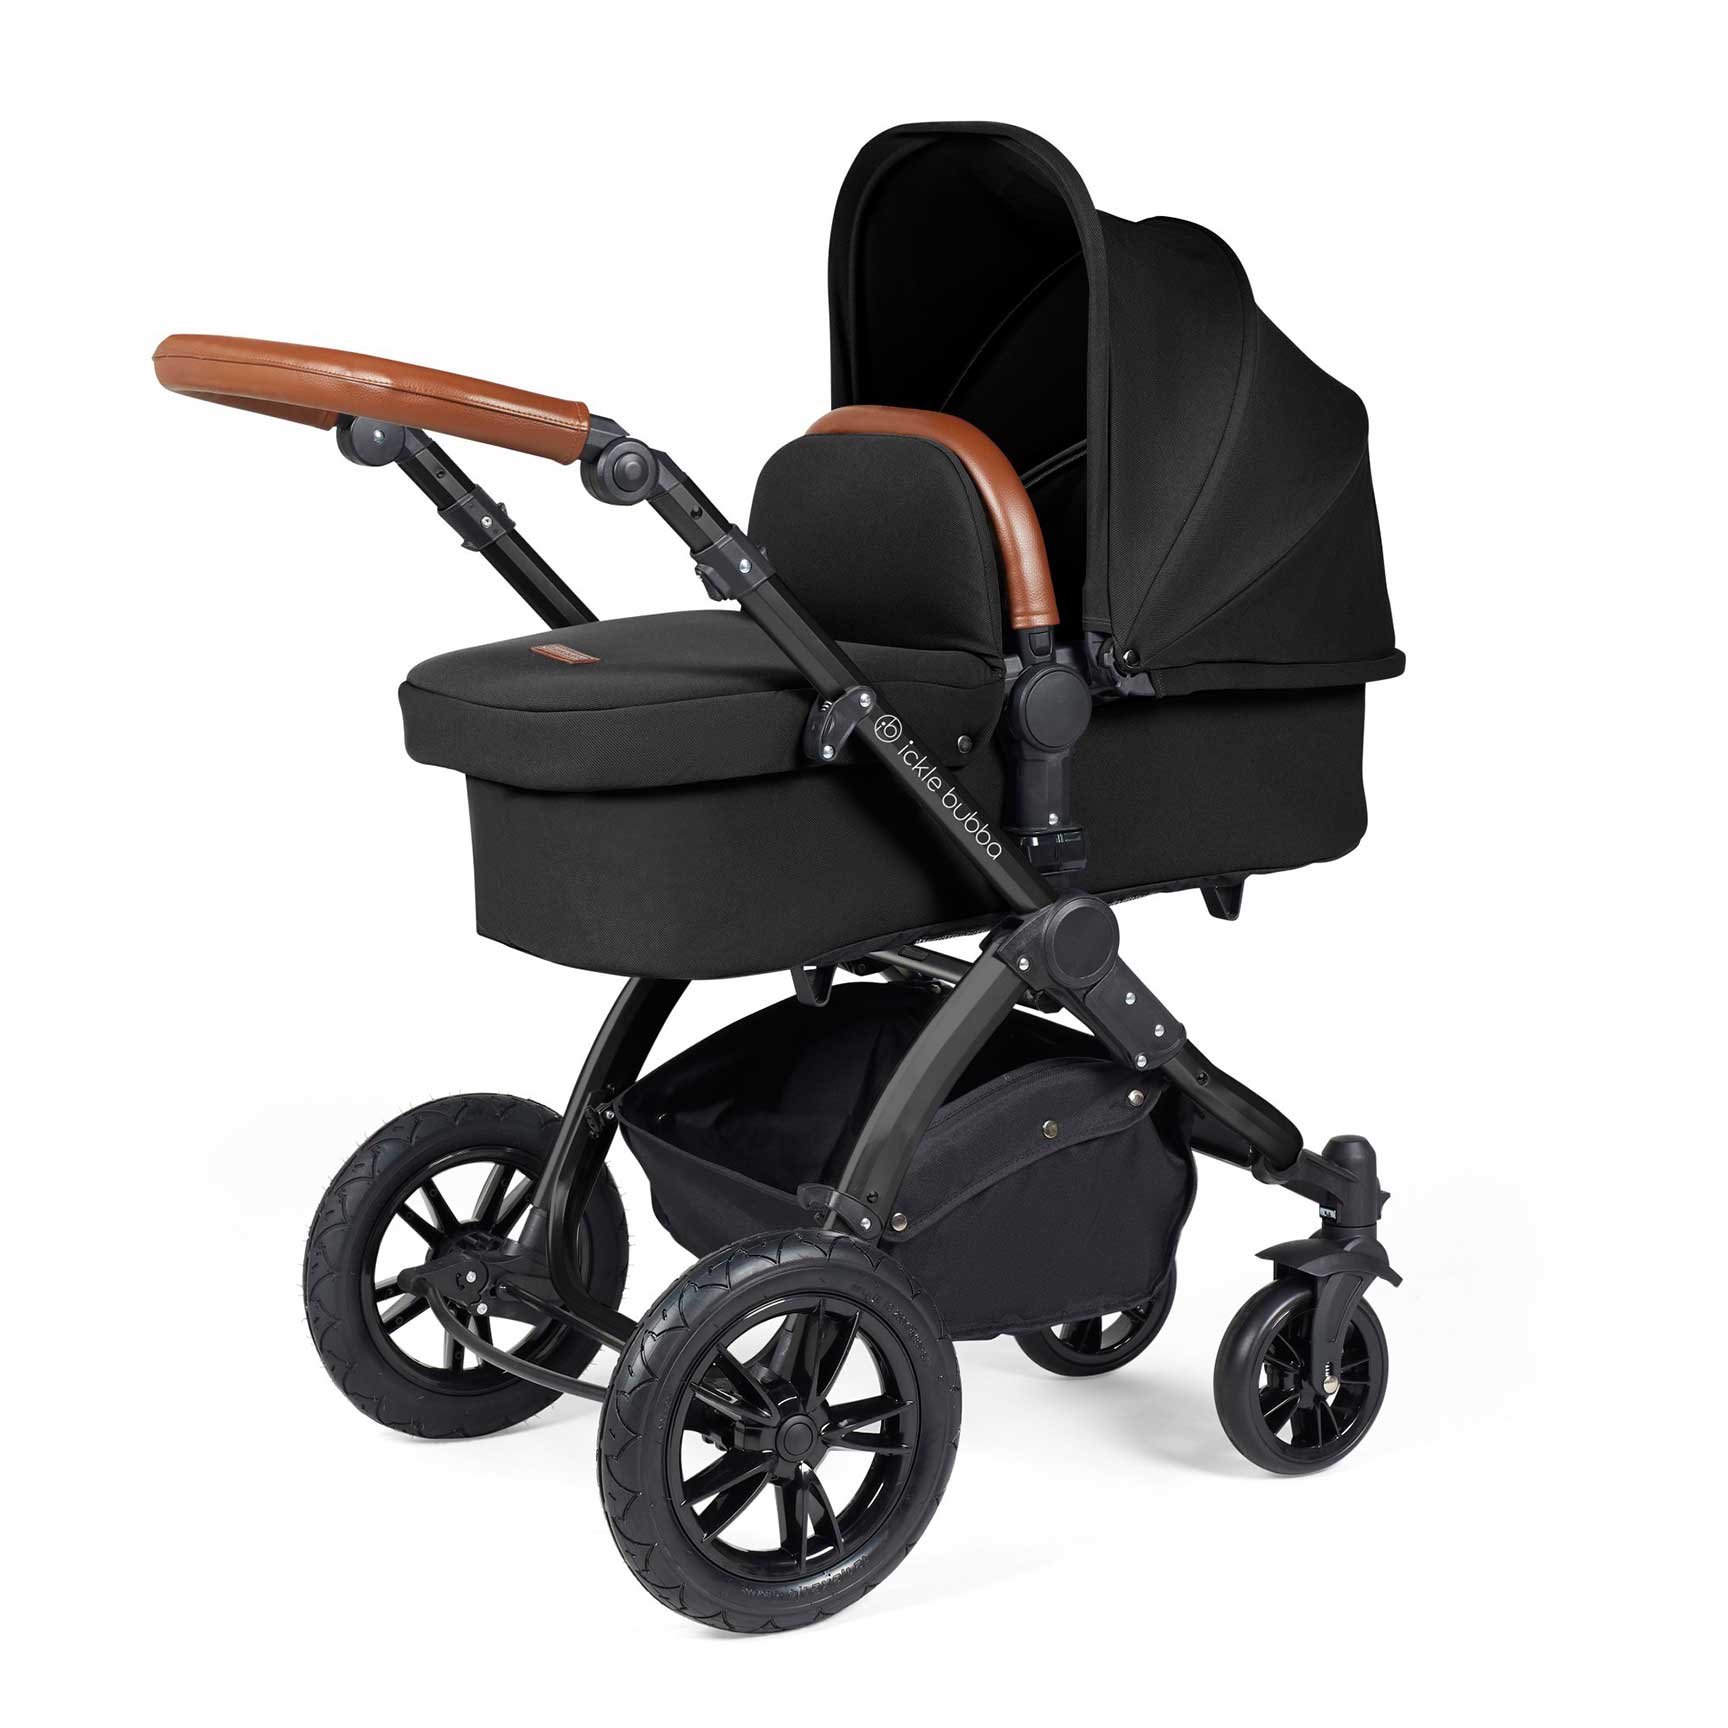 Ickle Bubba travel systems Ickle Bubba Stomp Luxe All-in-One Travel System with Isofix Base - Black/Midnight/Tan 10-011-300-203